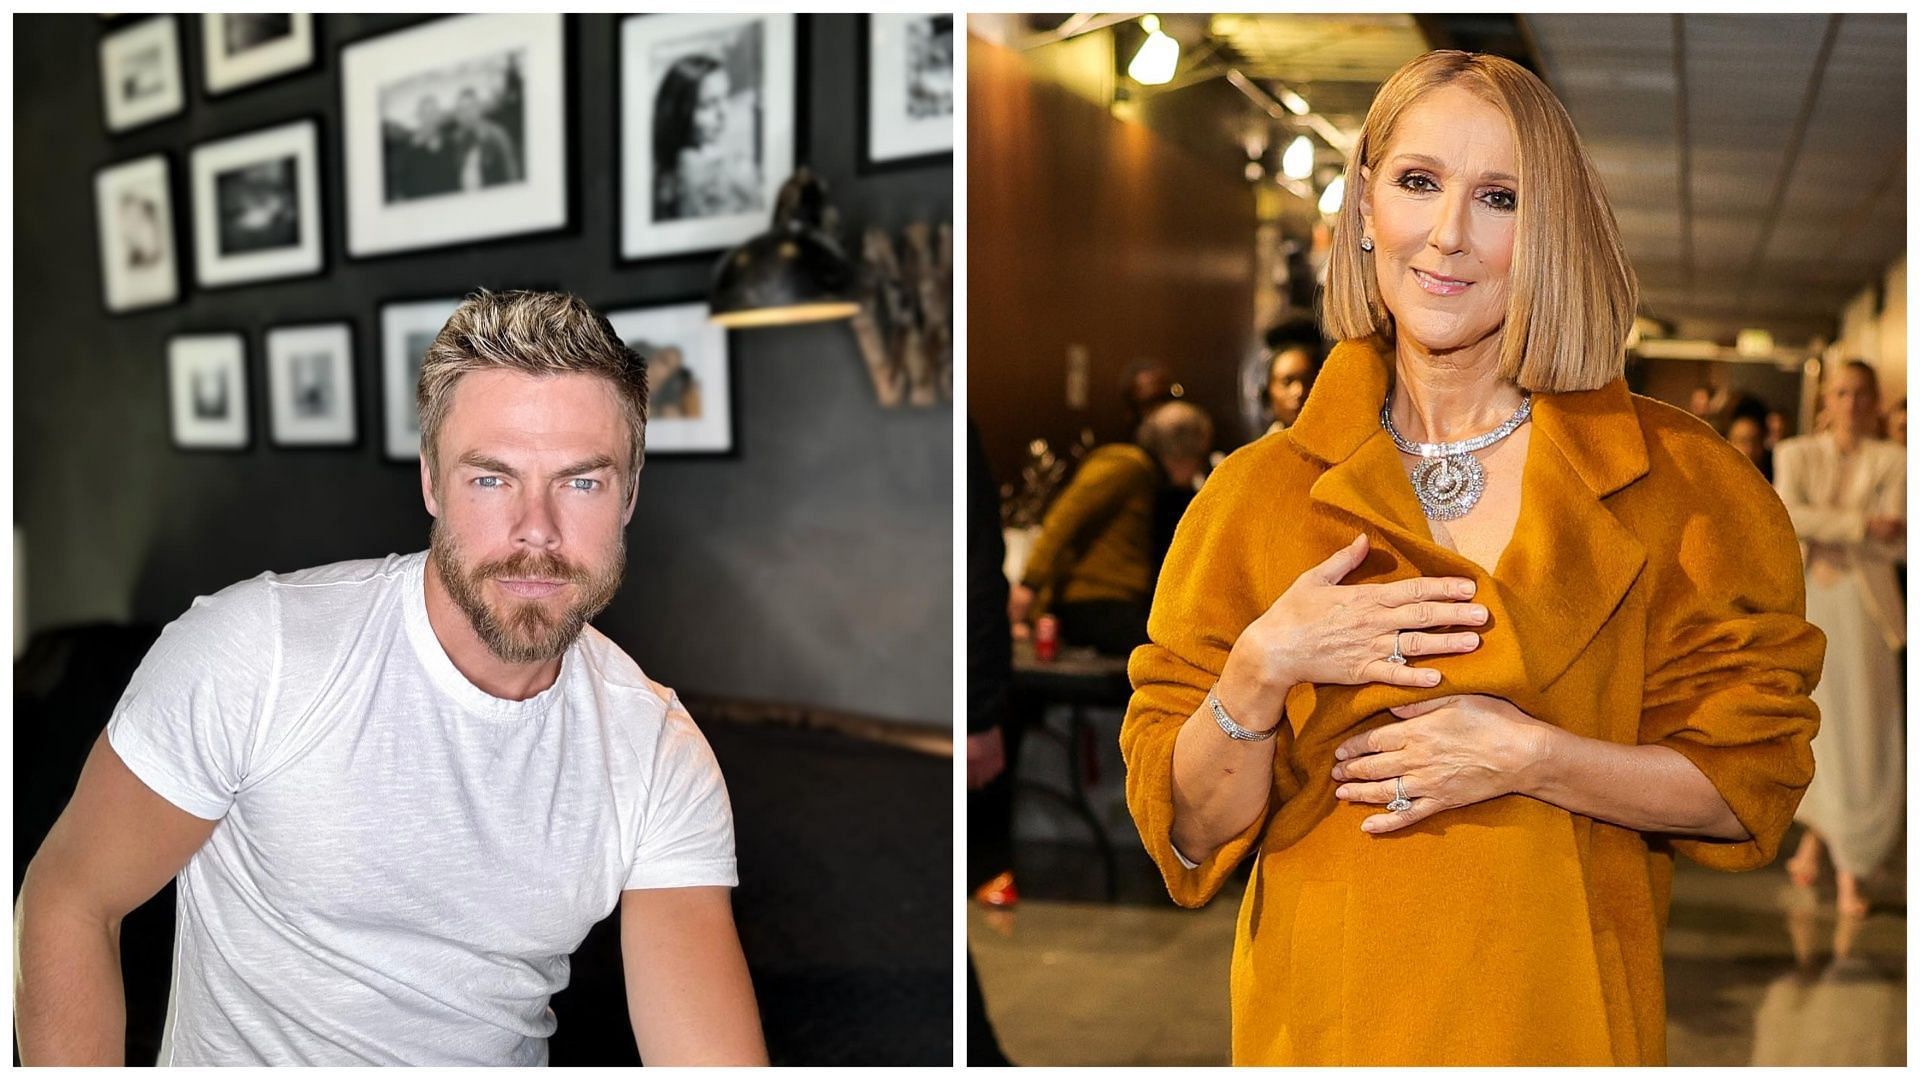 Derek Hough penned an emotional message after watching Celine Dion